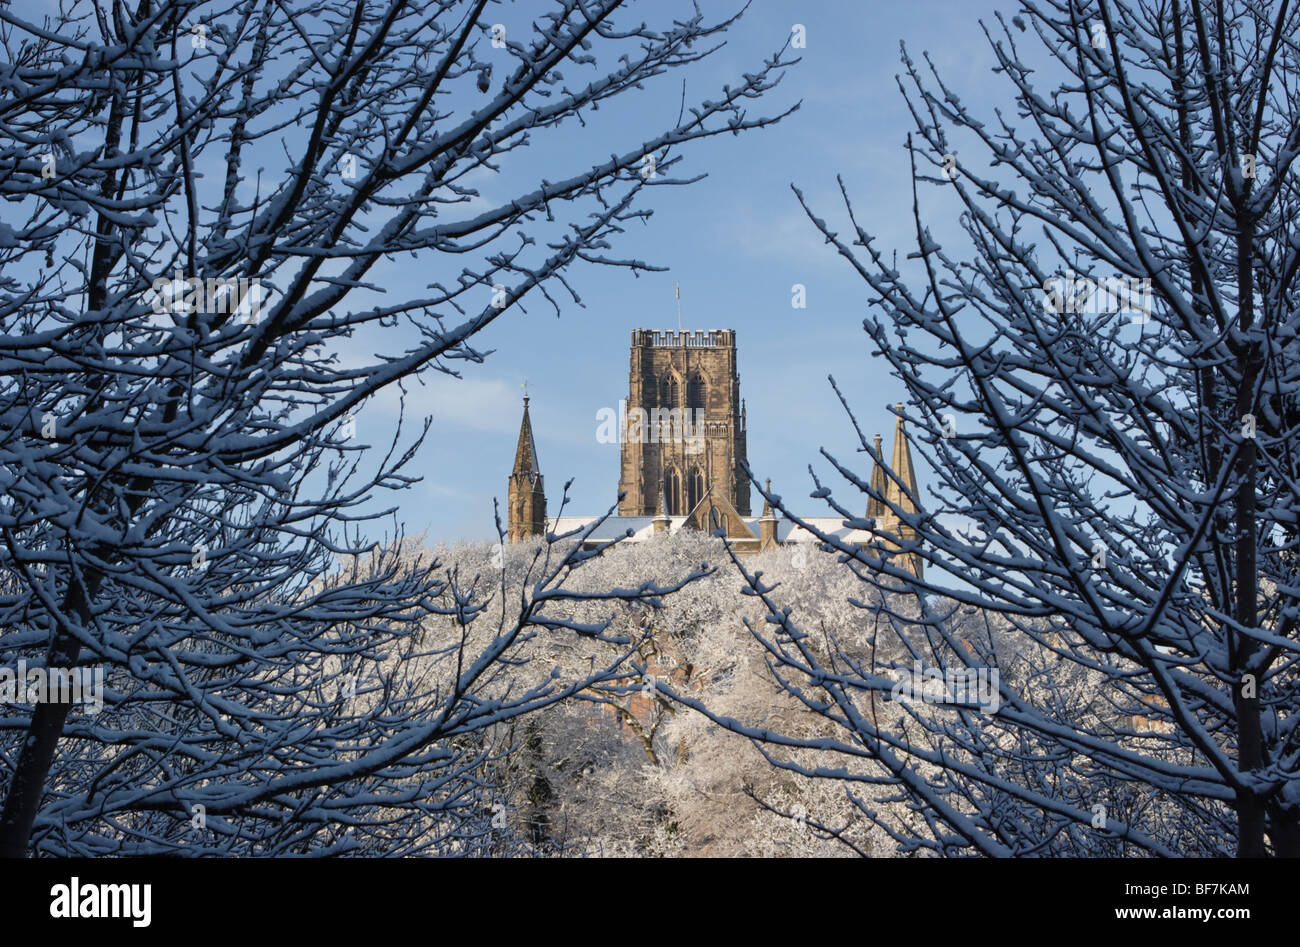 Durham cathedral seen through snow covered trees in winter time, England, UK Stock Photo